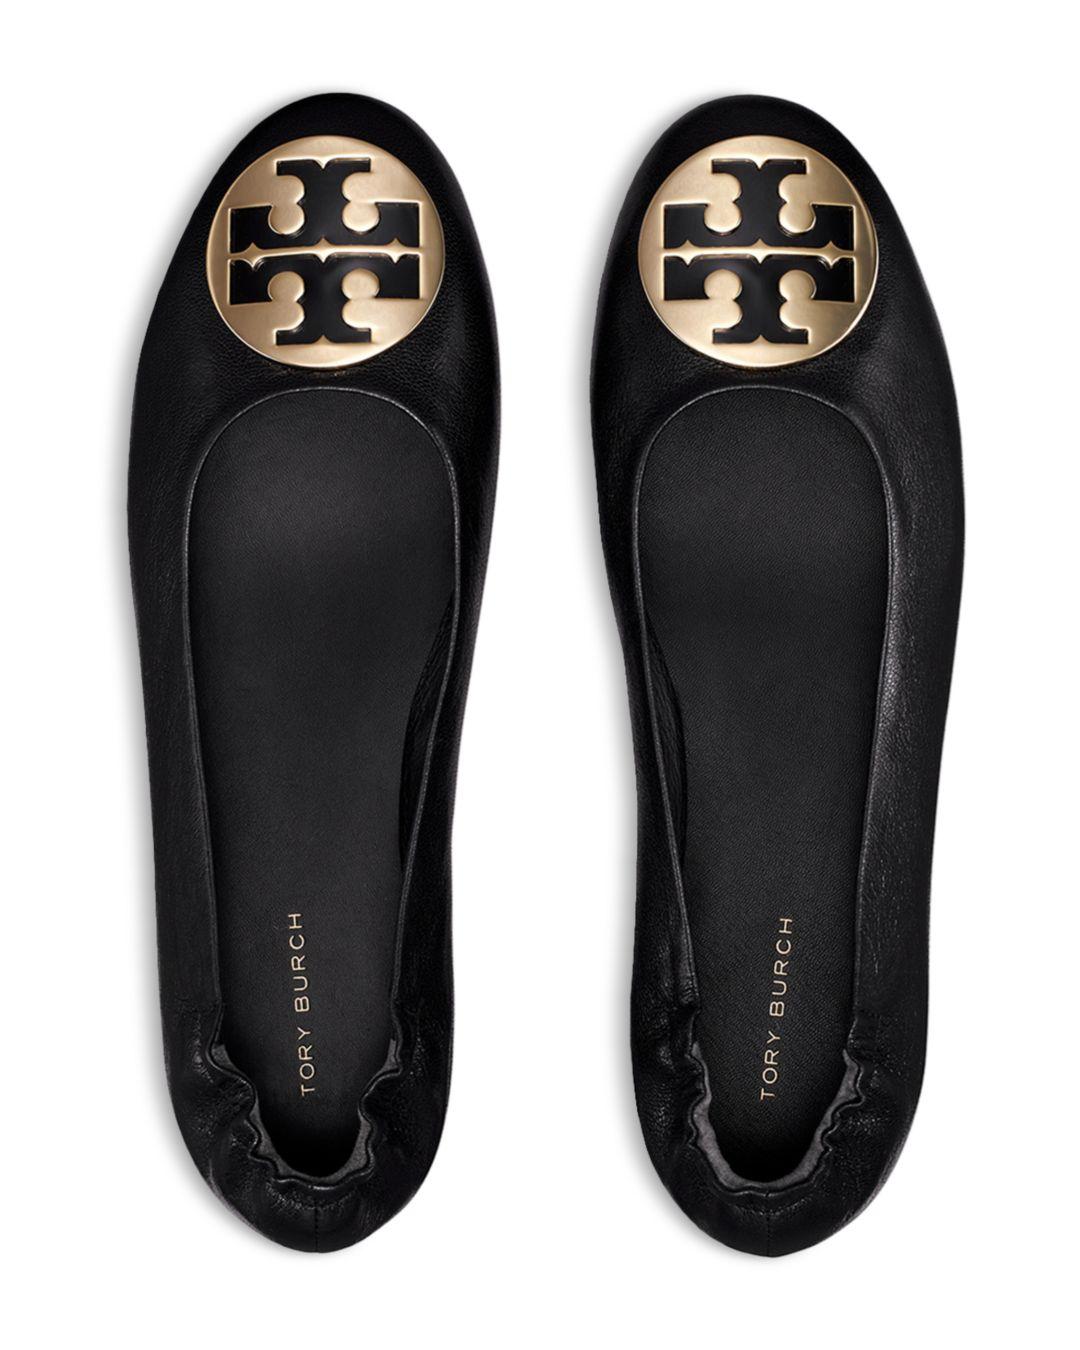 Tory Burch Claire Ballet Flats in Black | Lyst